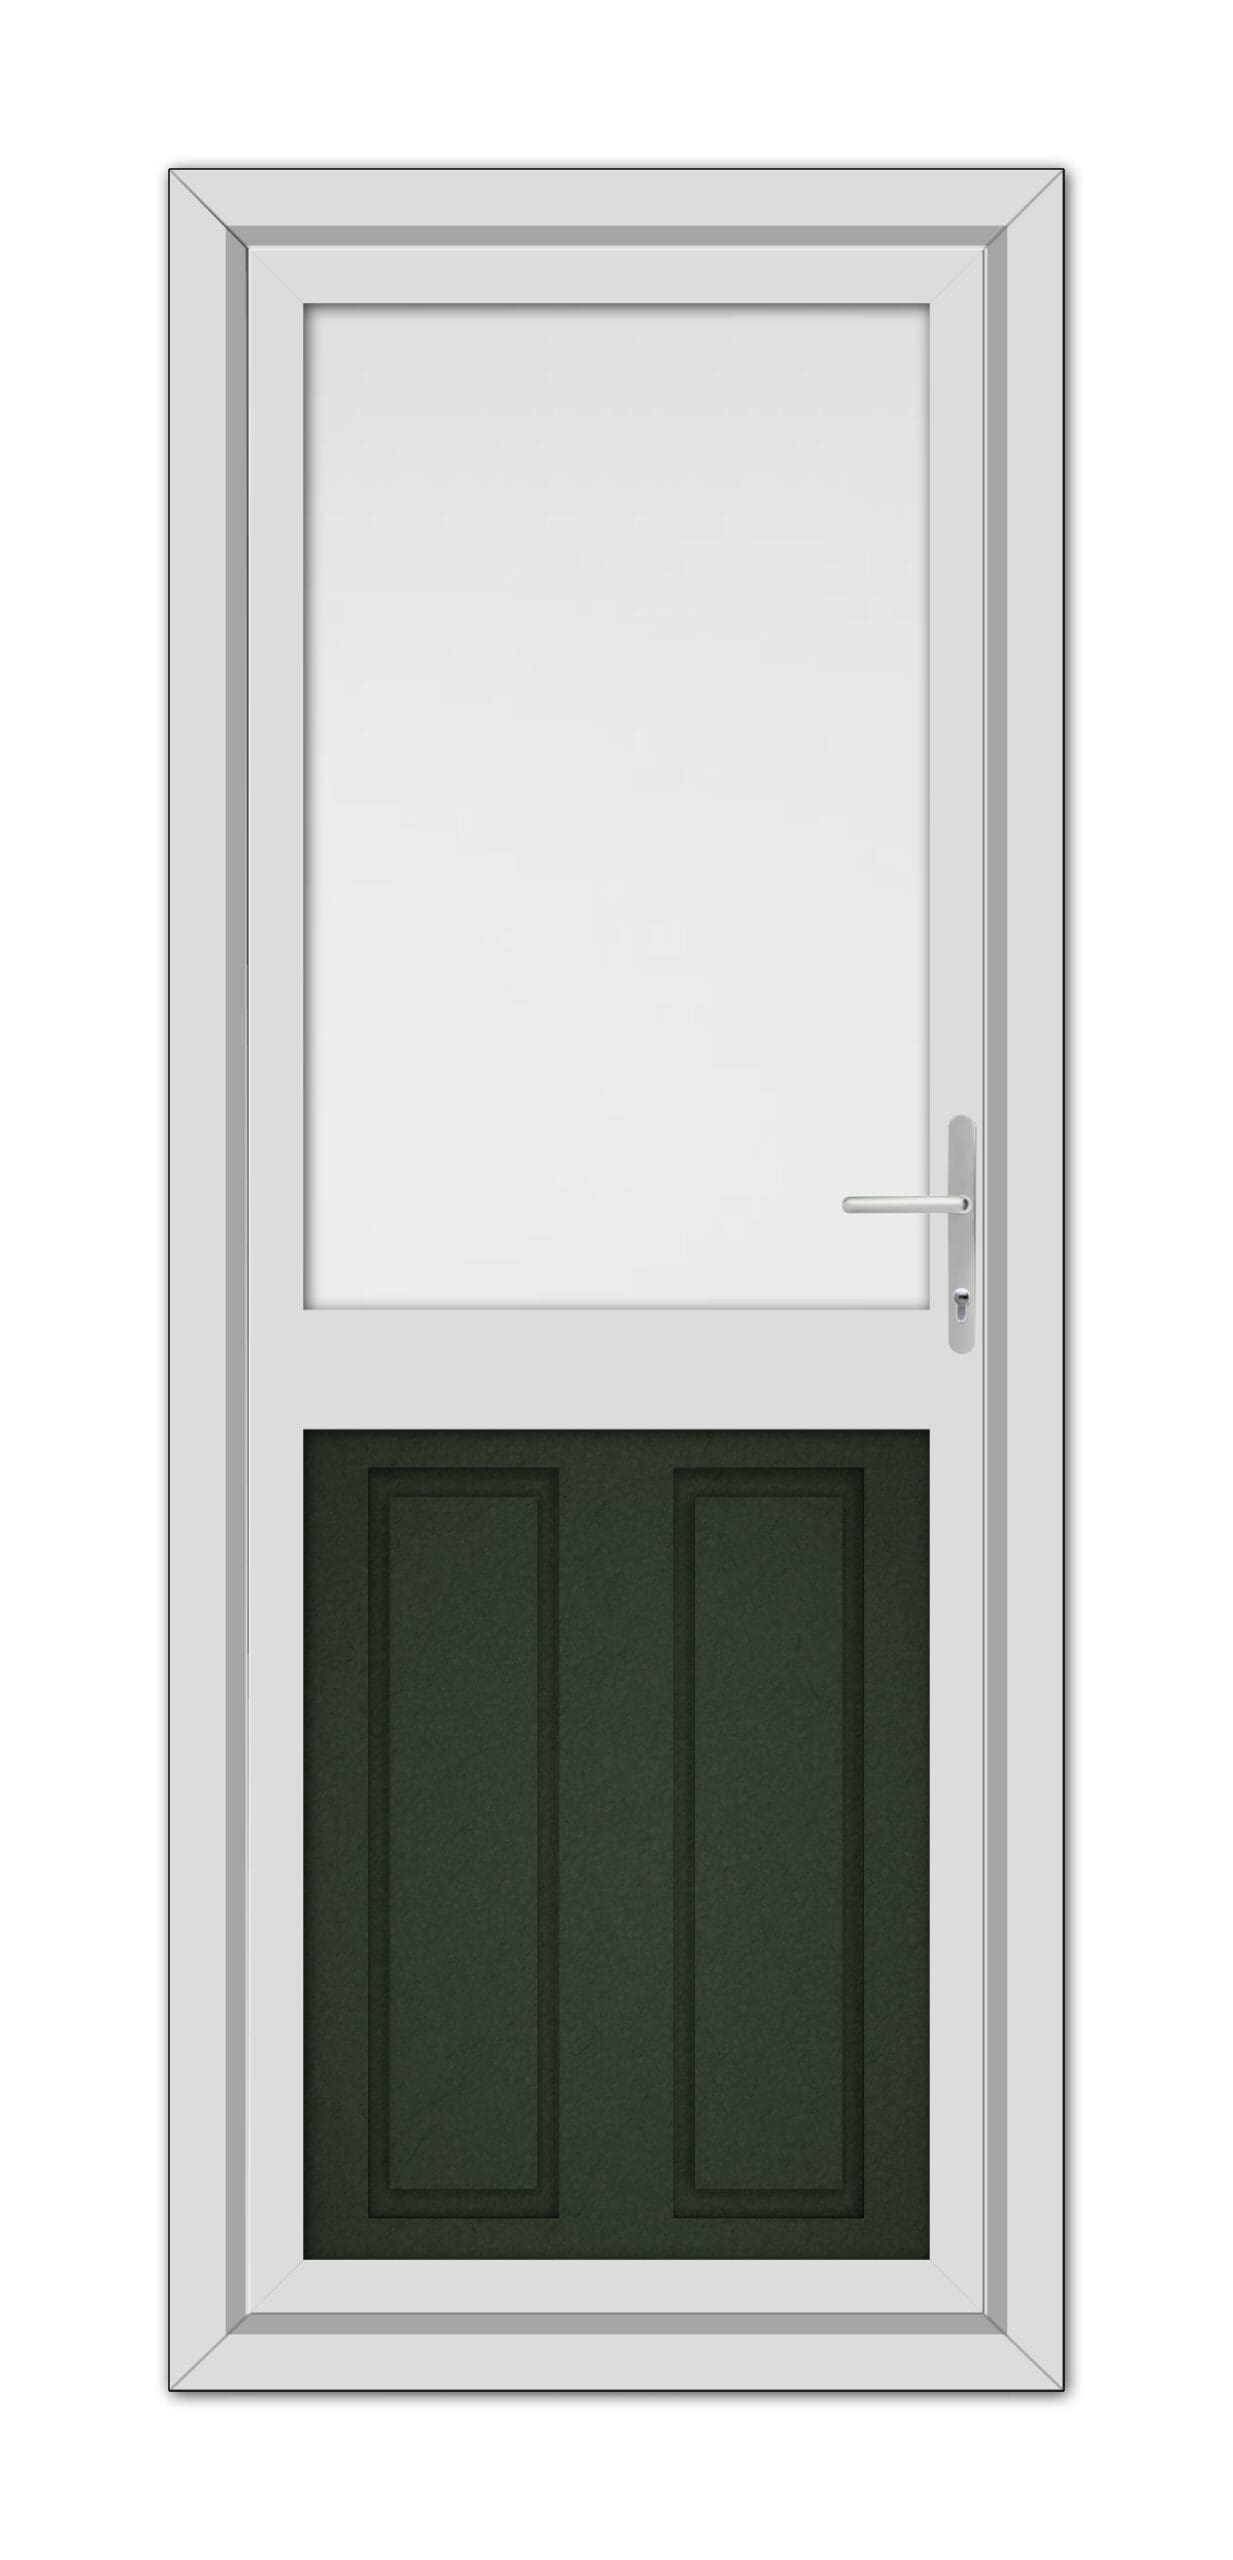 A Green Manor Half uPVC Back Door with a square glass window on top and dark green panels on the bottom, featuring a silver handle on the right side.